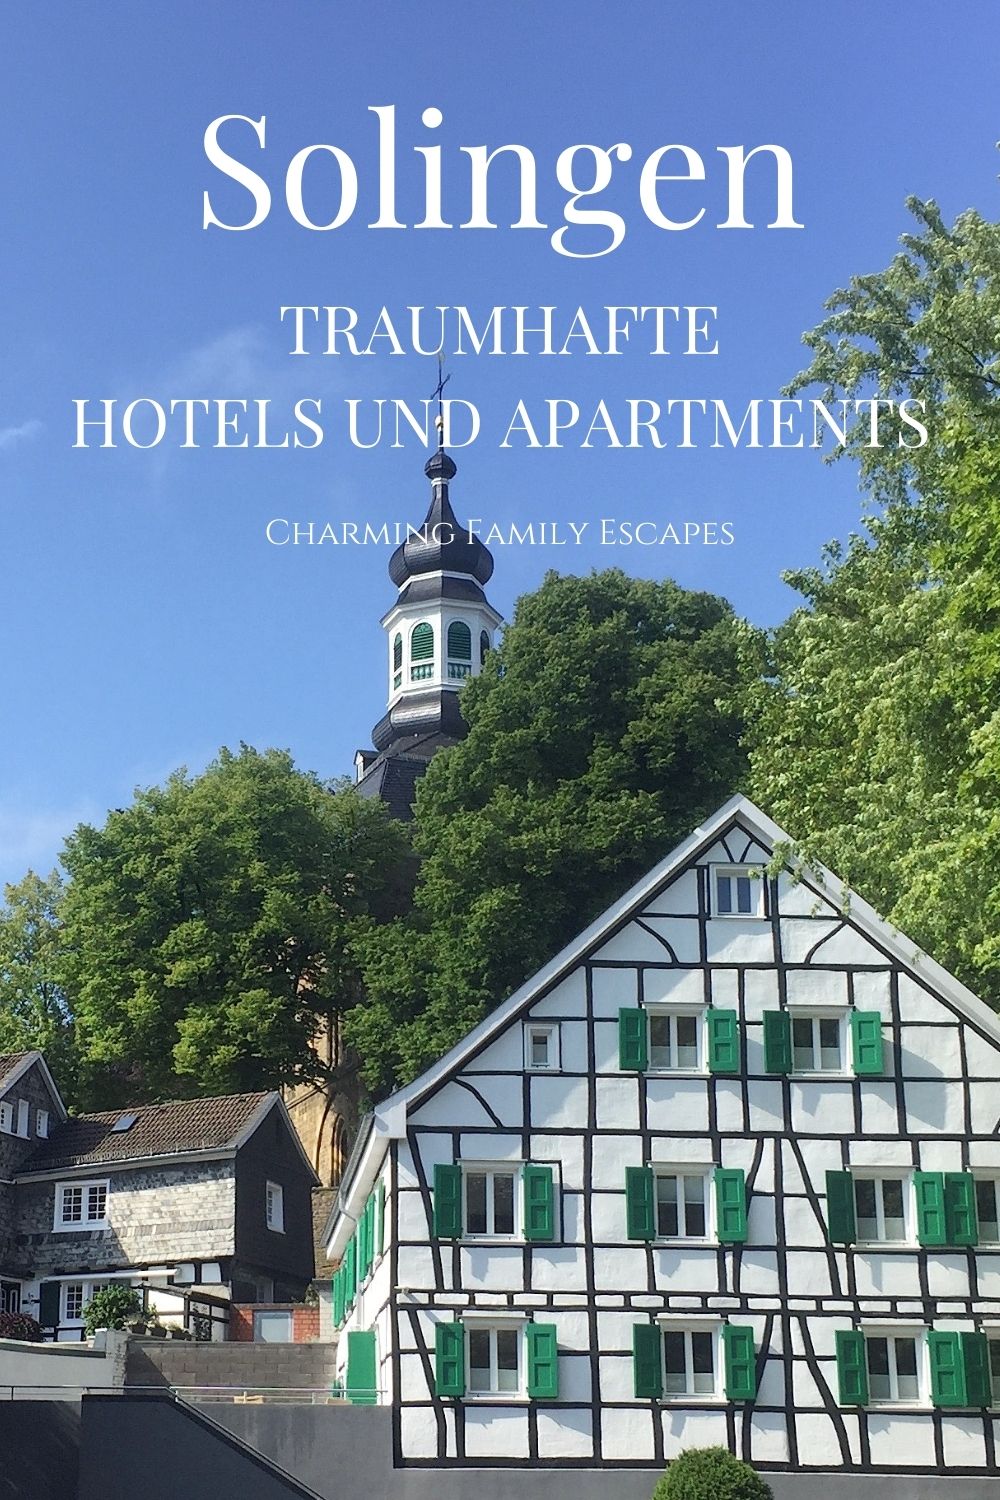 Solingen - traumhafte Hotels und Apartments für Familien auf Charming Family Escapes